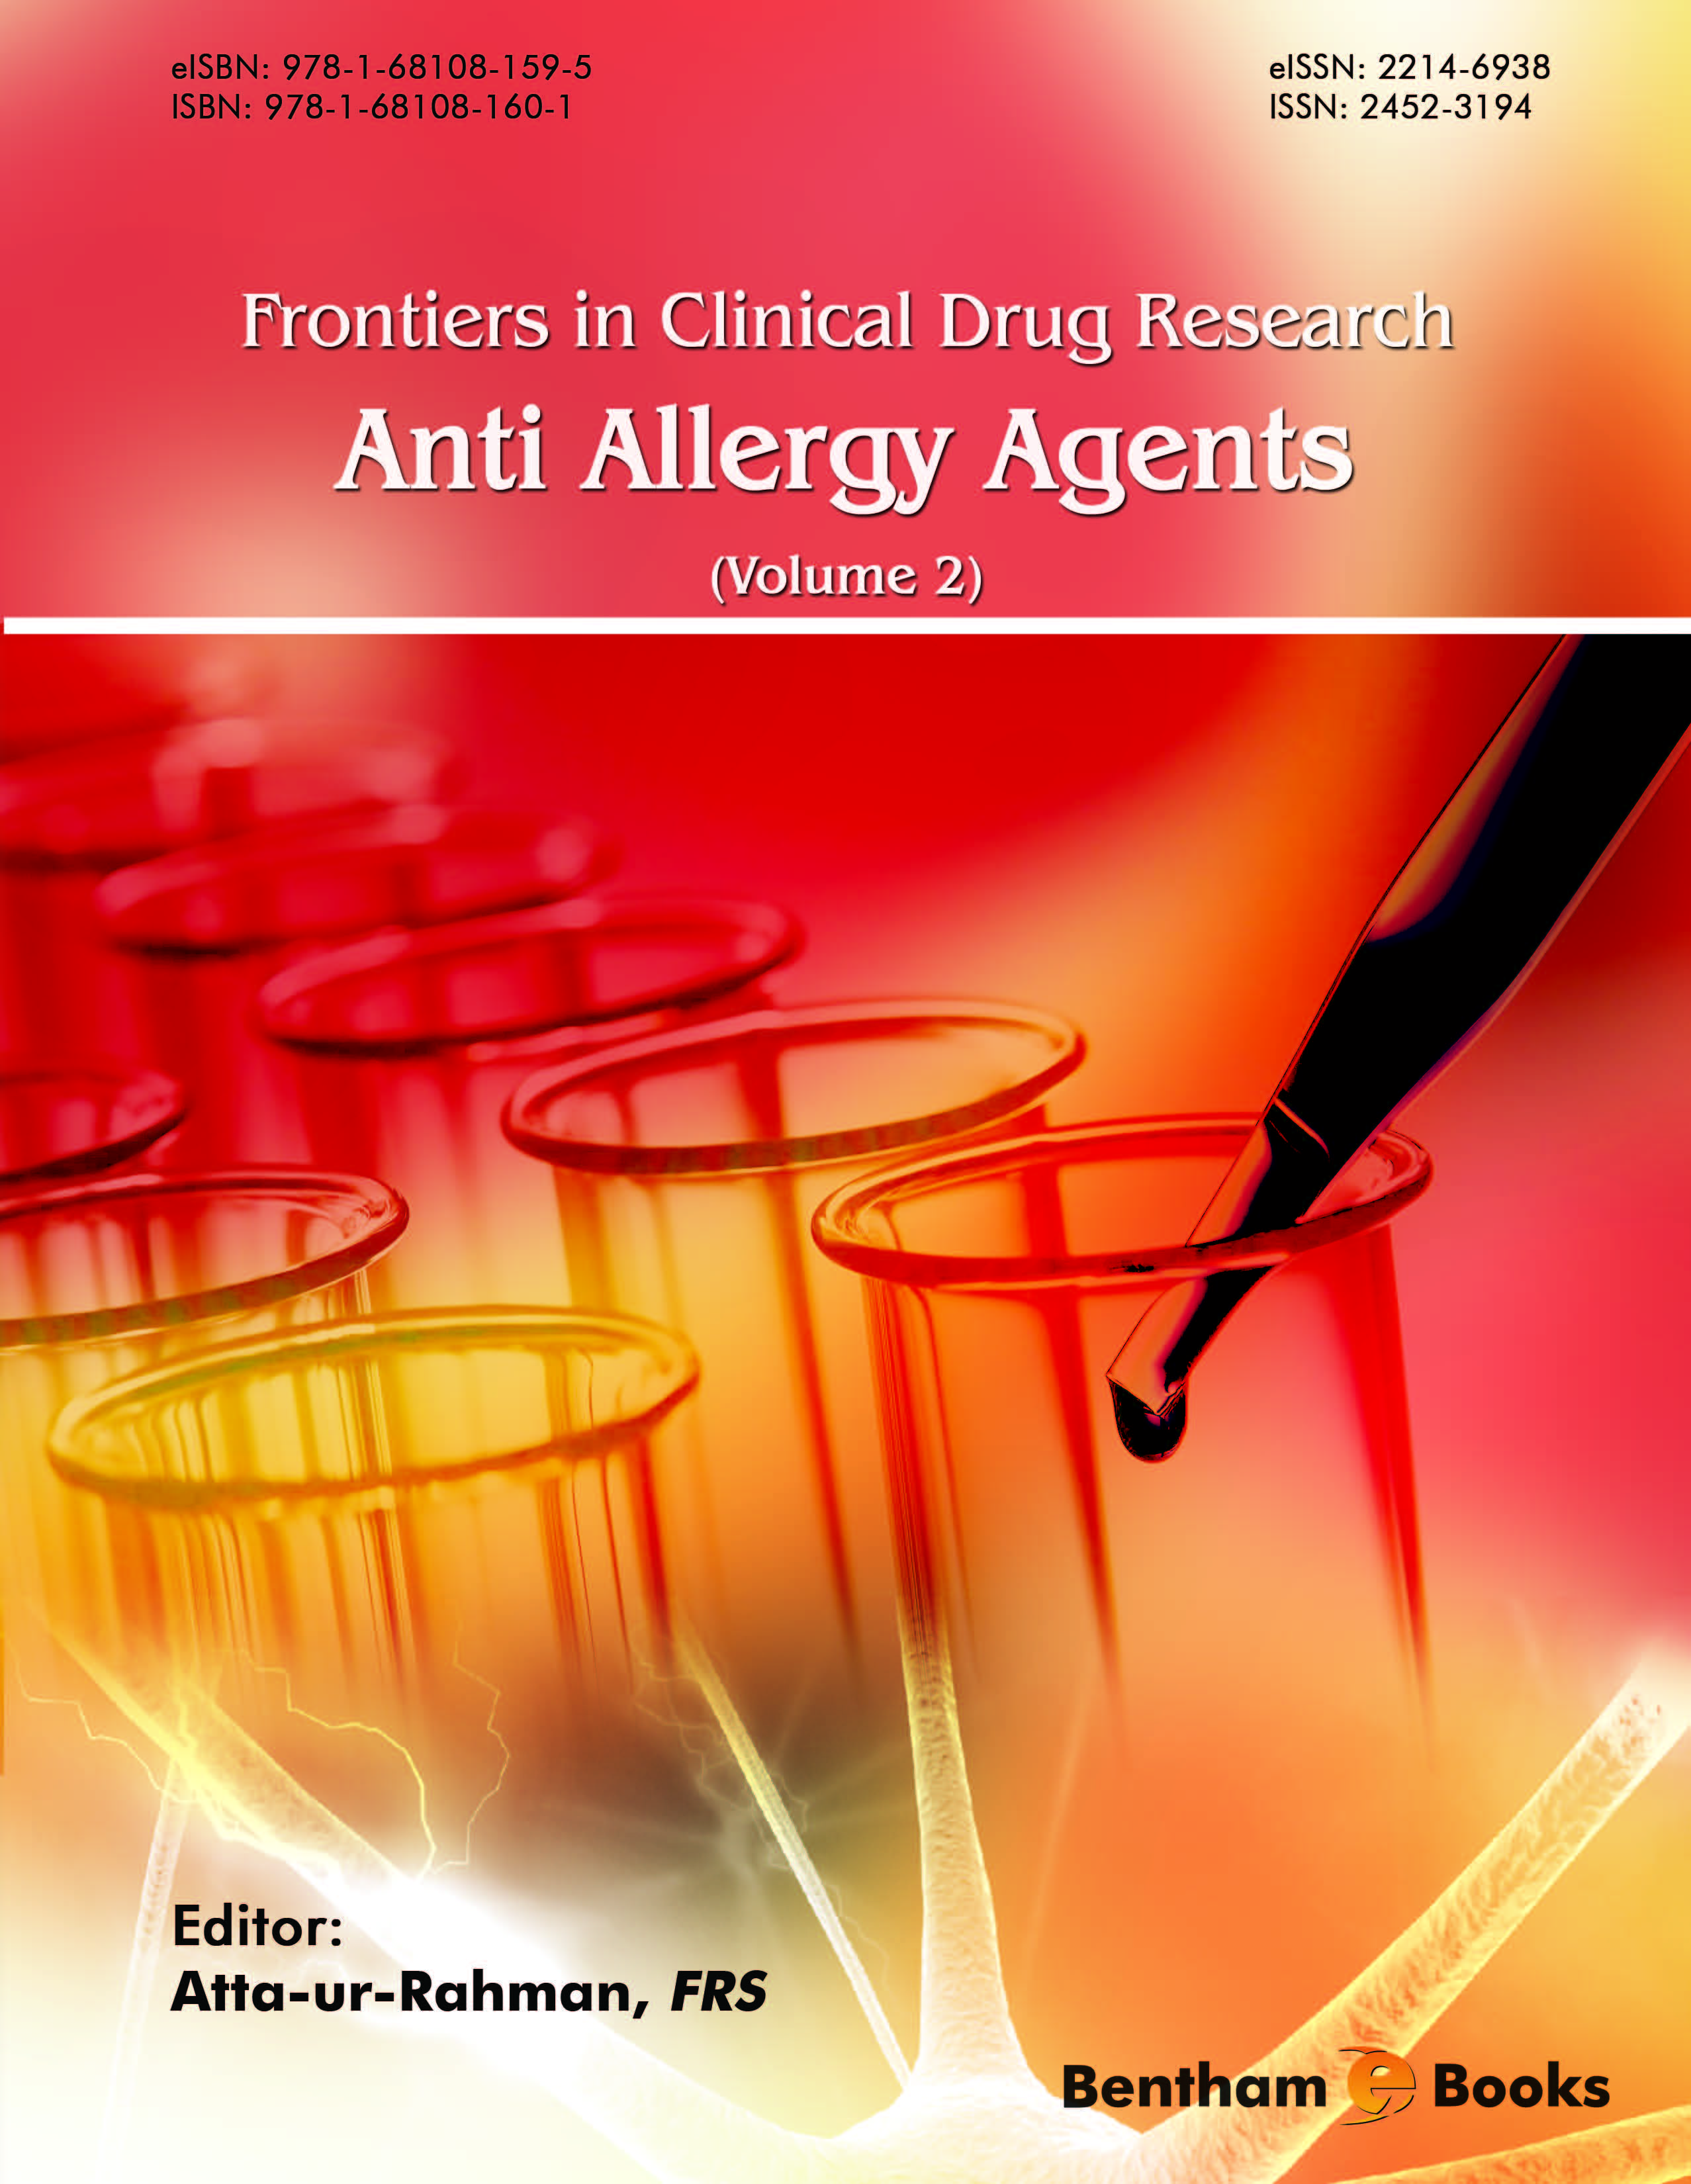 Frontiers in Clinical Drug Research – Anti Allergy Agents